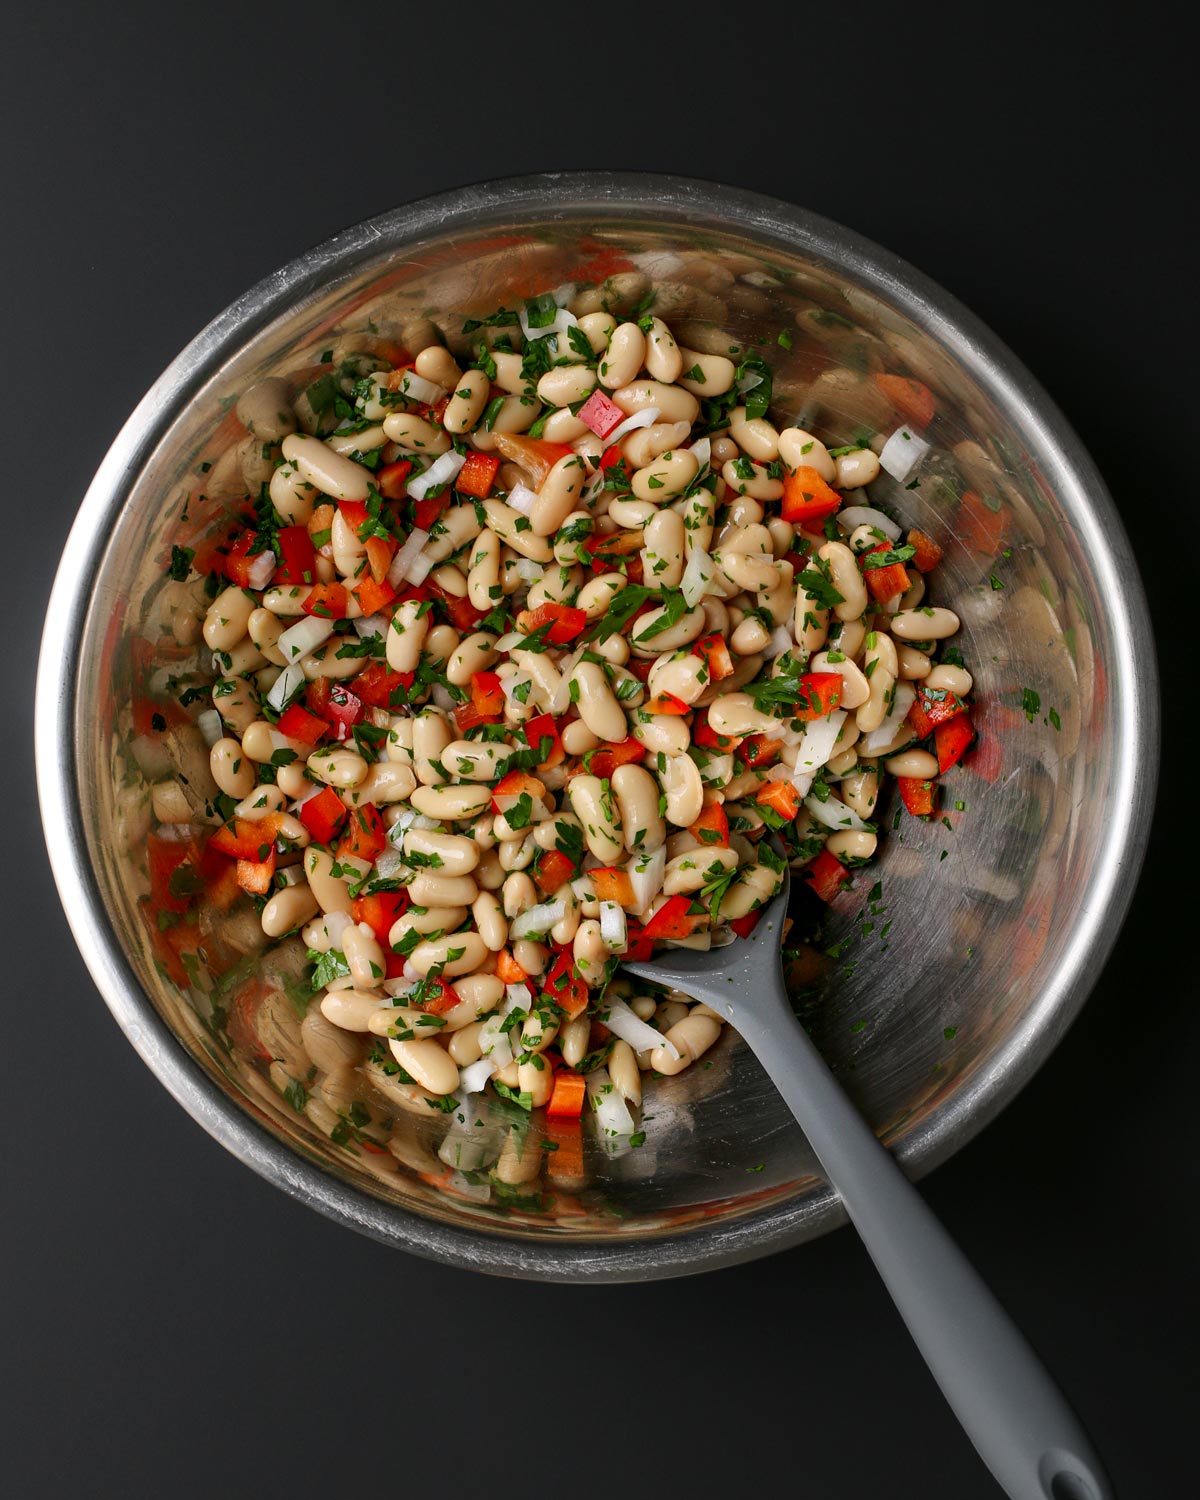 beans and veggies stirred together.